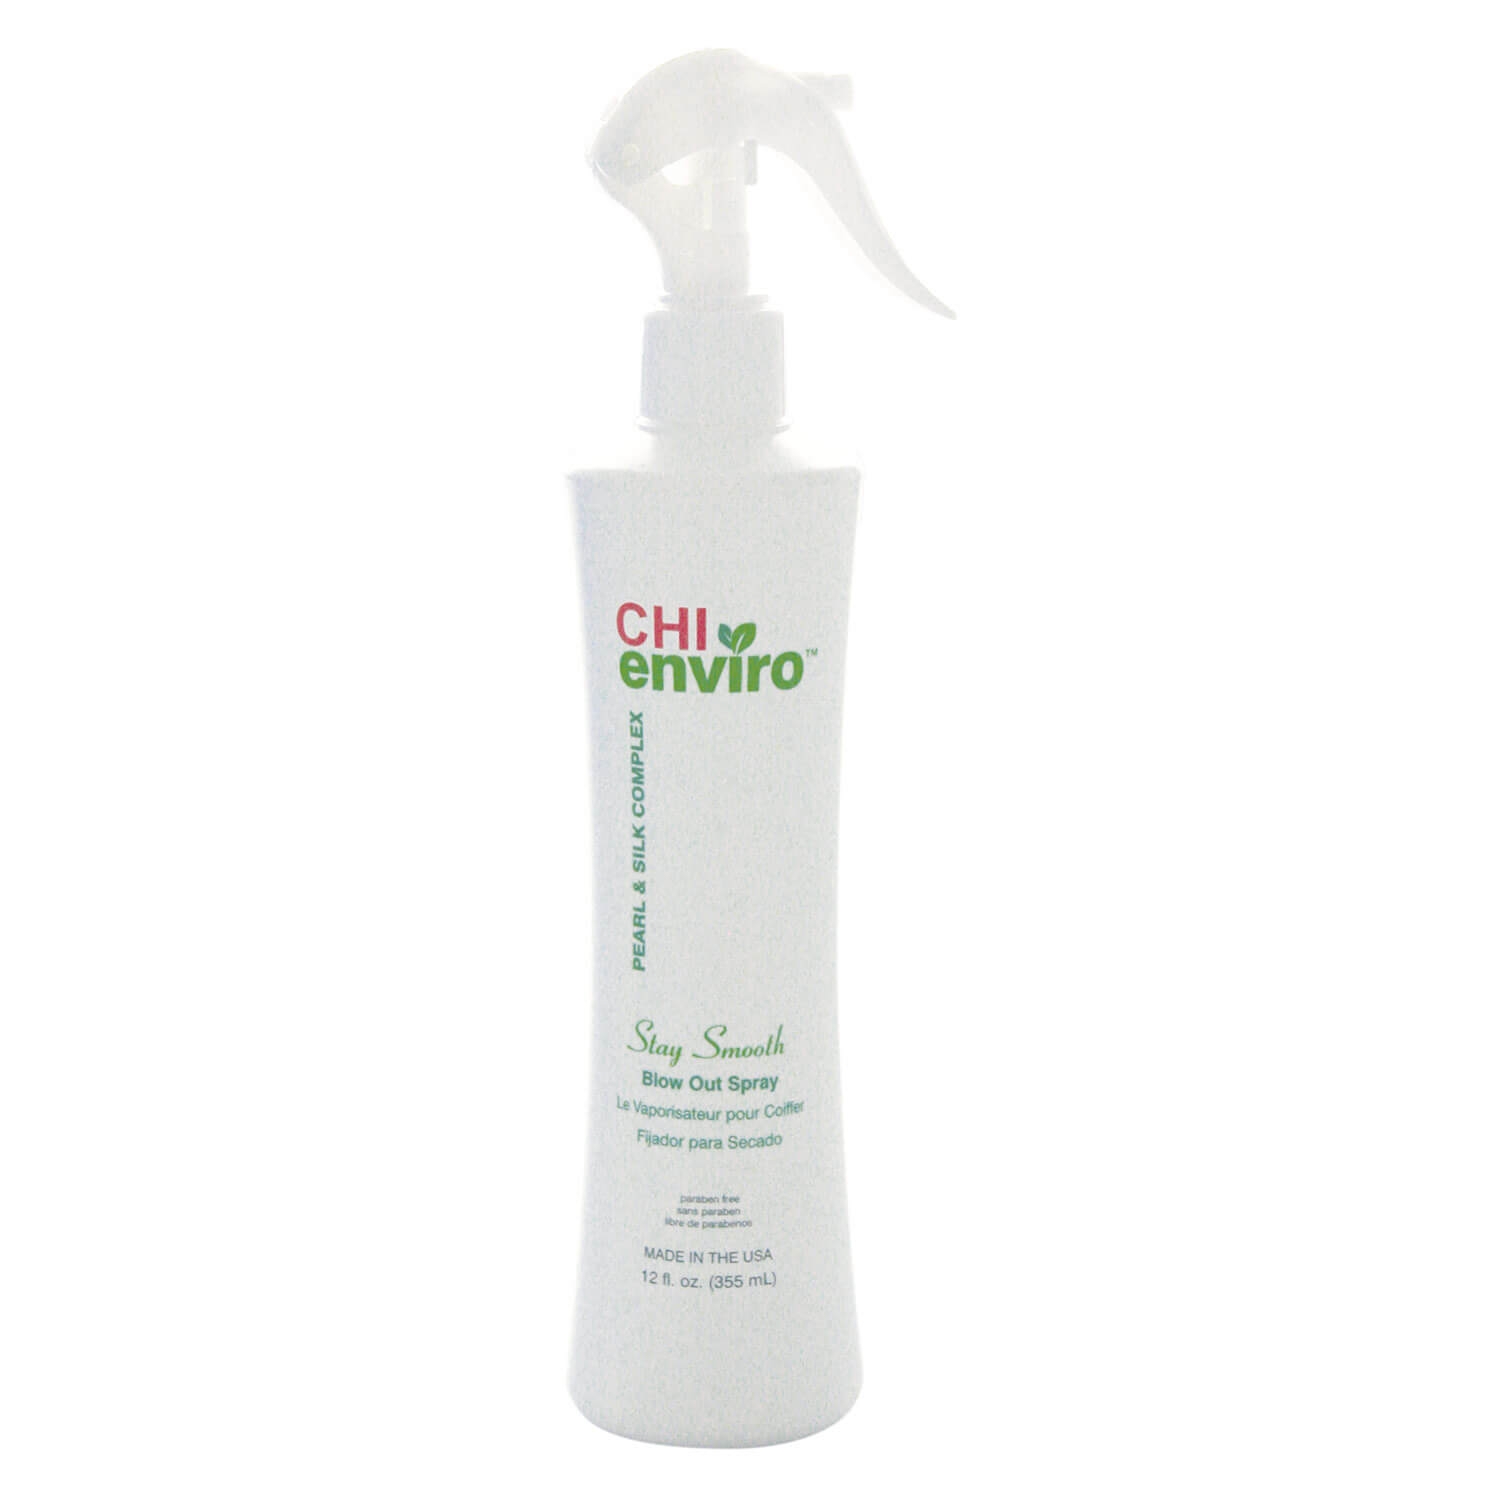 Product image from CHI enviro - Stay Smooth Blow Out Spray